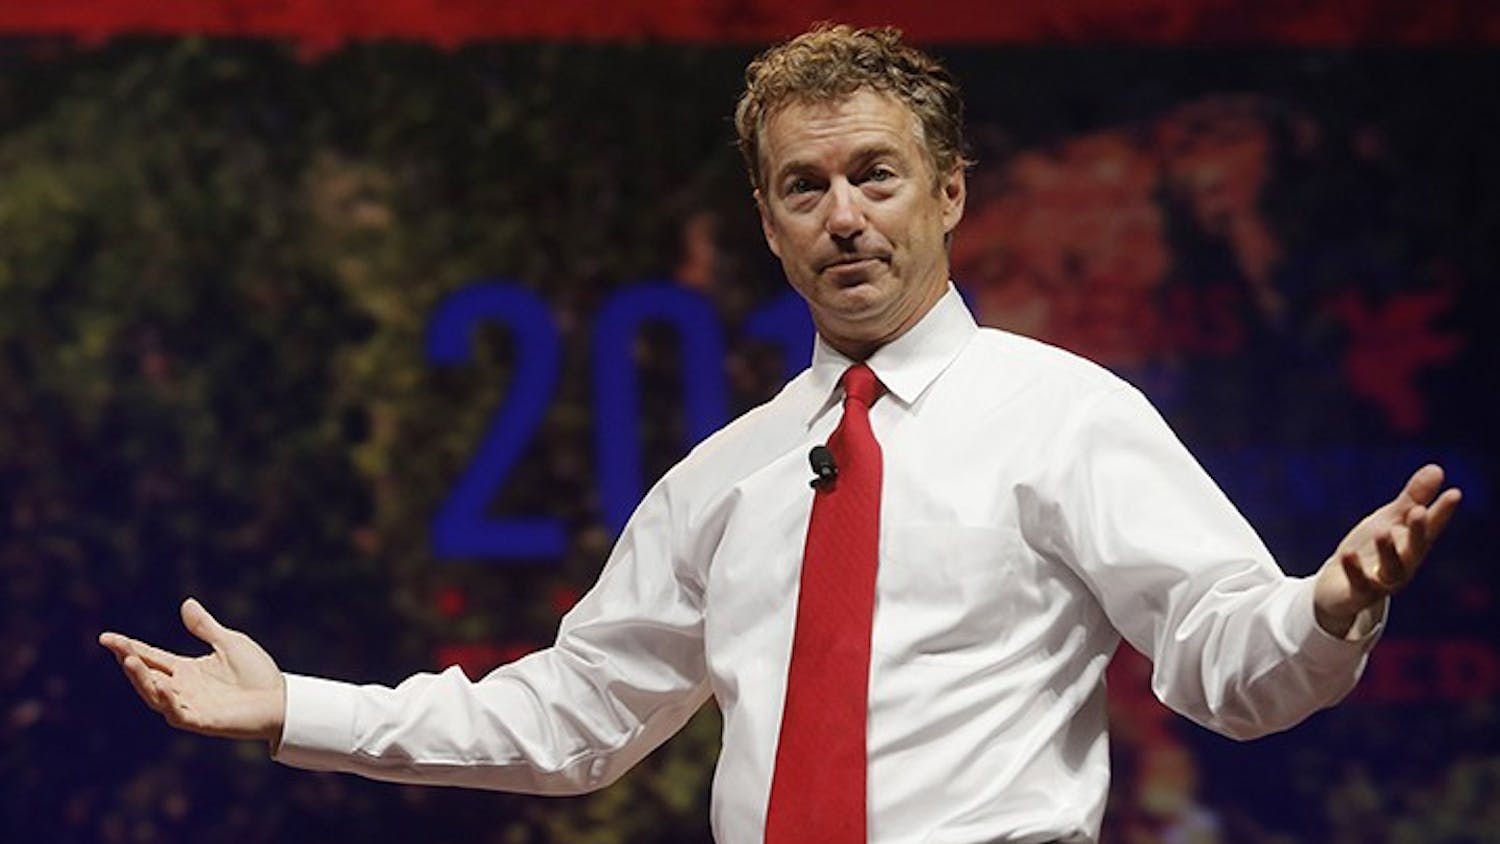 Kentucky Sen. Rand Paul speaks during the Texas Republican Convention at the Fort Worth Convention Center in Fort Worth, Texas, on Friday, June 6, 2014. (Rodger Mallison/Fort Worth Star-Telegram/MCT)